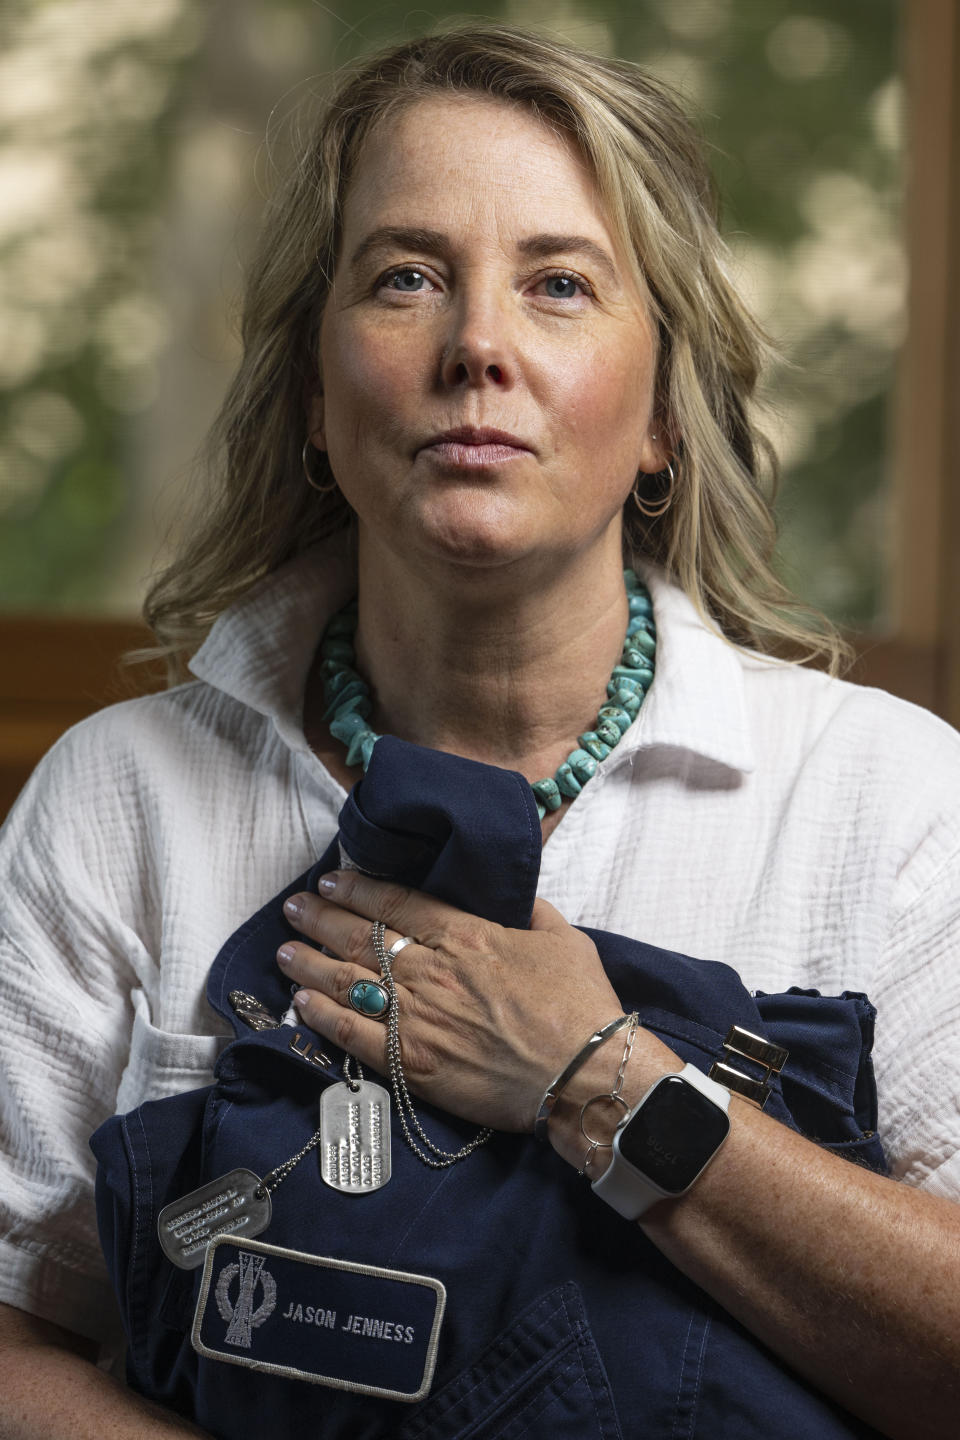 Doreen Jenness, the widow of Air Force Capt. Jason Jenness, sits for a portrait during an interview with the Associated Press at her home in Missoula, Mont., Aug. 26, 2023. Capt. Jenness was a Malmstrom missileer who died of non-Hodgkin lymphoma in 2001 at the age of 31. (AP Photo/Tommy Martino)